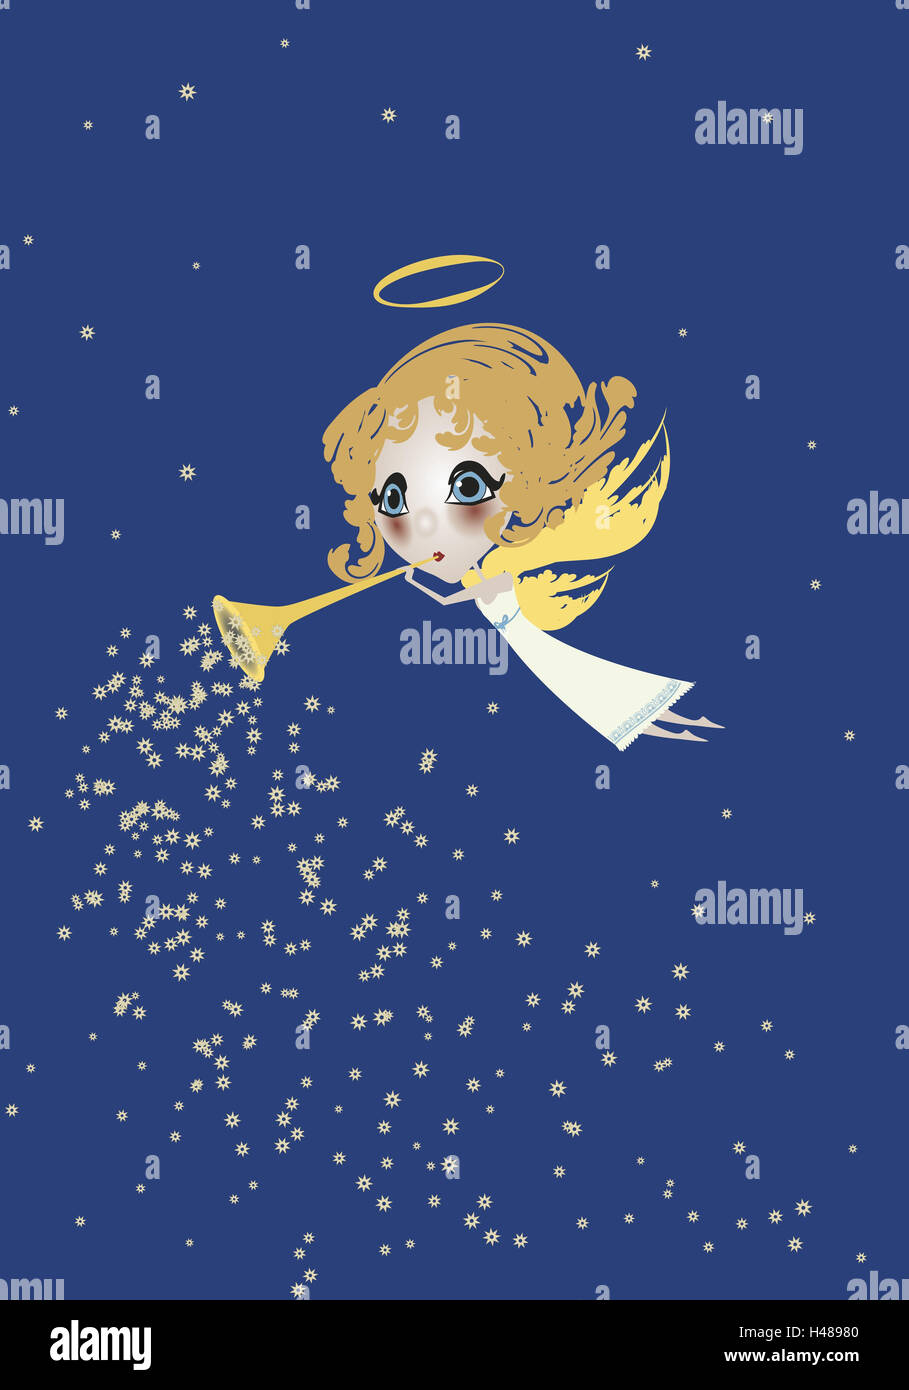 Illustration, sky, angel, blond, trumpet, graphics, stars, celestial body, figure, little angel, infant Jesus, for Christmas, heavenly, halo, wing, fly, play music, make music, trombone, whole bodies, Stern's dust, Stock Photo